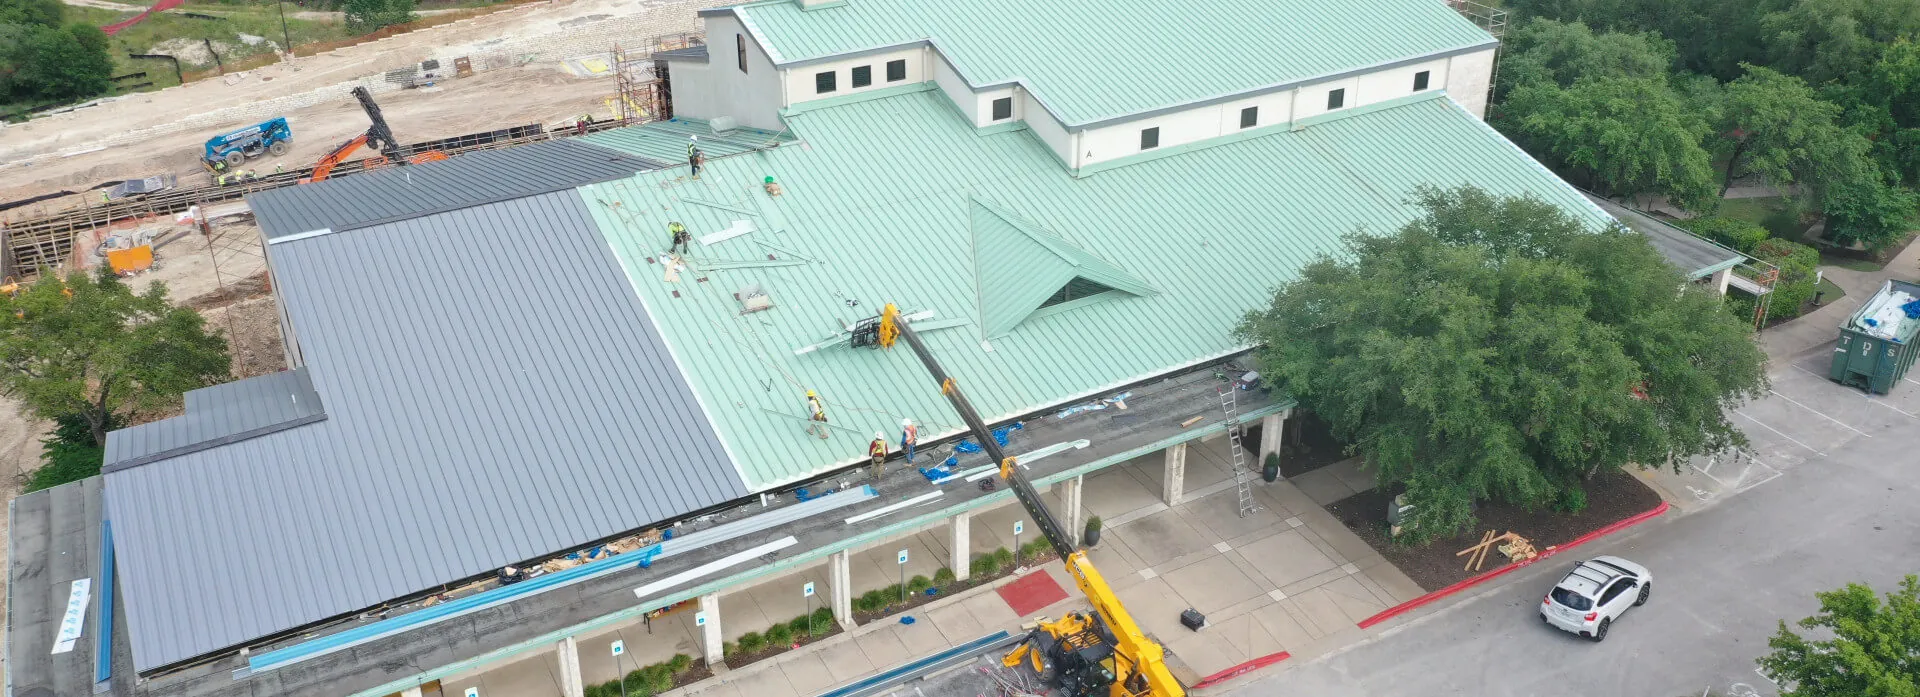 A Texas Roof Repair crew on a large commercial building installing a new metal roof.